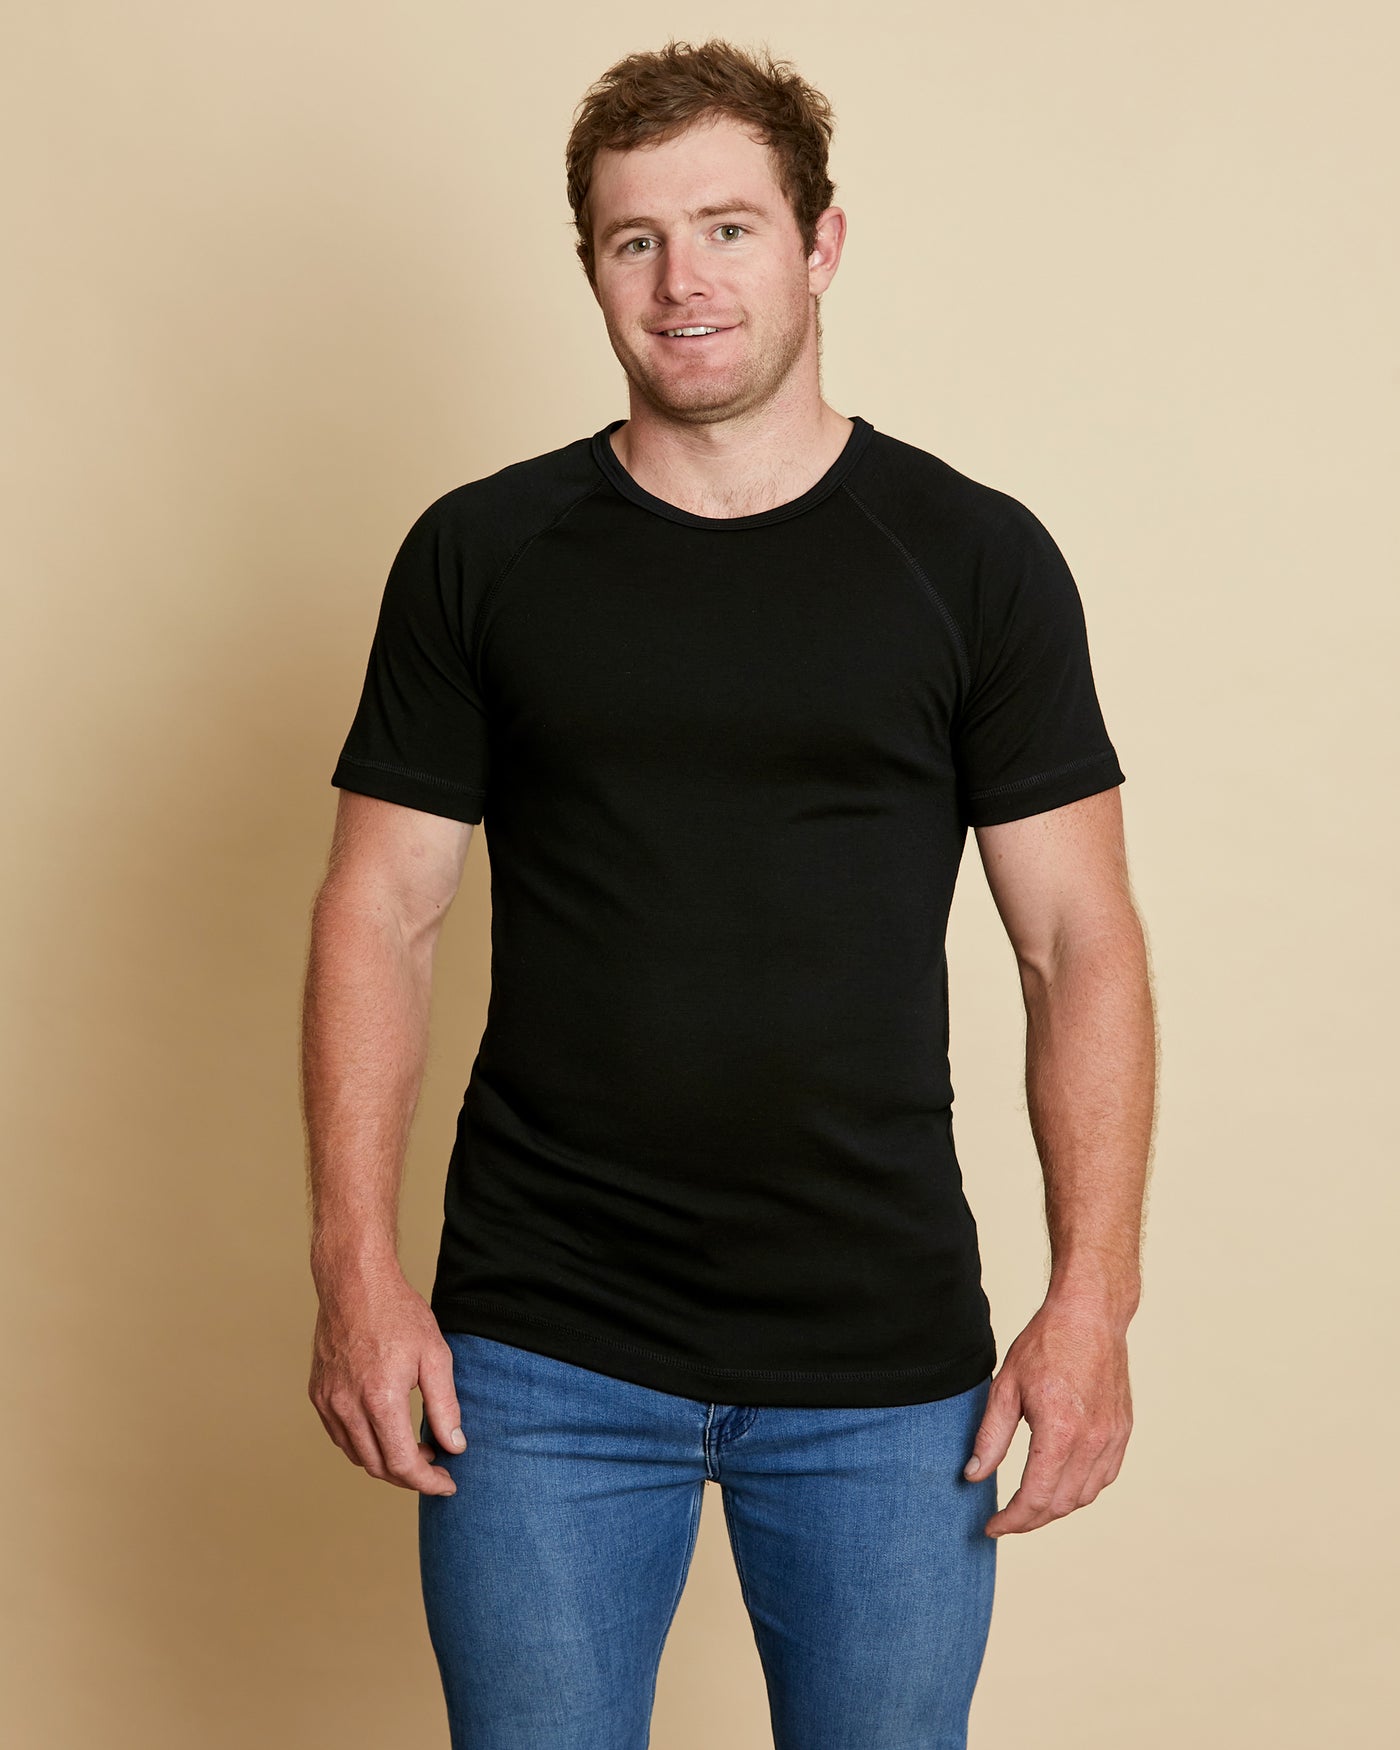 Man wearing soft Australian Merino wool short sleeve crew neck t.shirt in black. Designed to wear next to the skin as a base layer or on its own as a t.shirt style. Made in Australia at Woolerina's workrooms at Forbes in central west NSW.